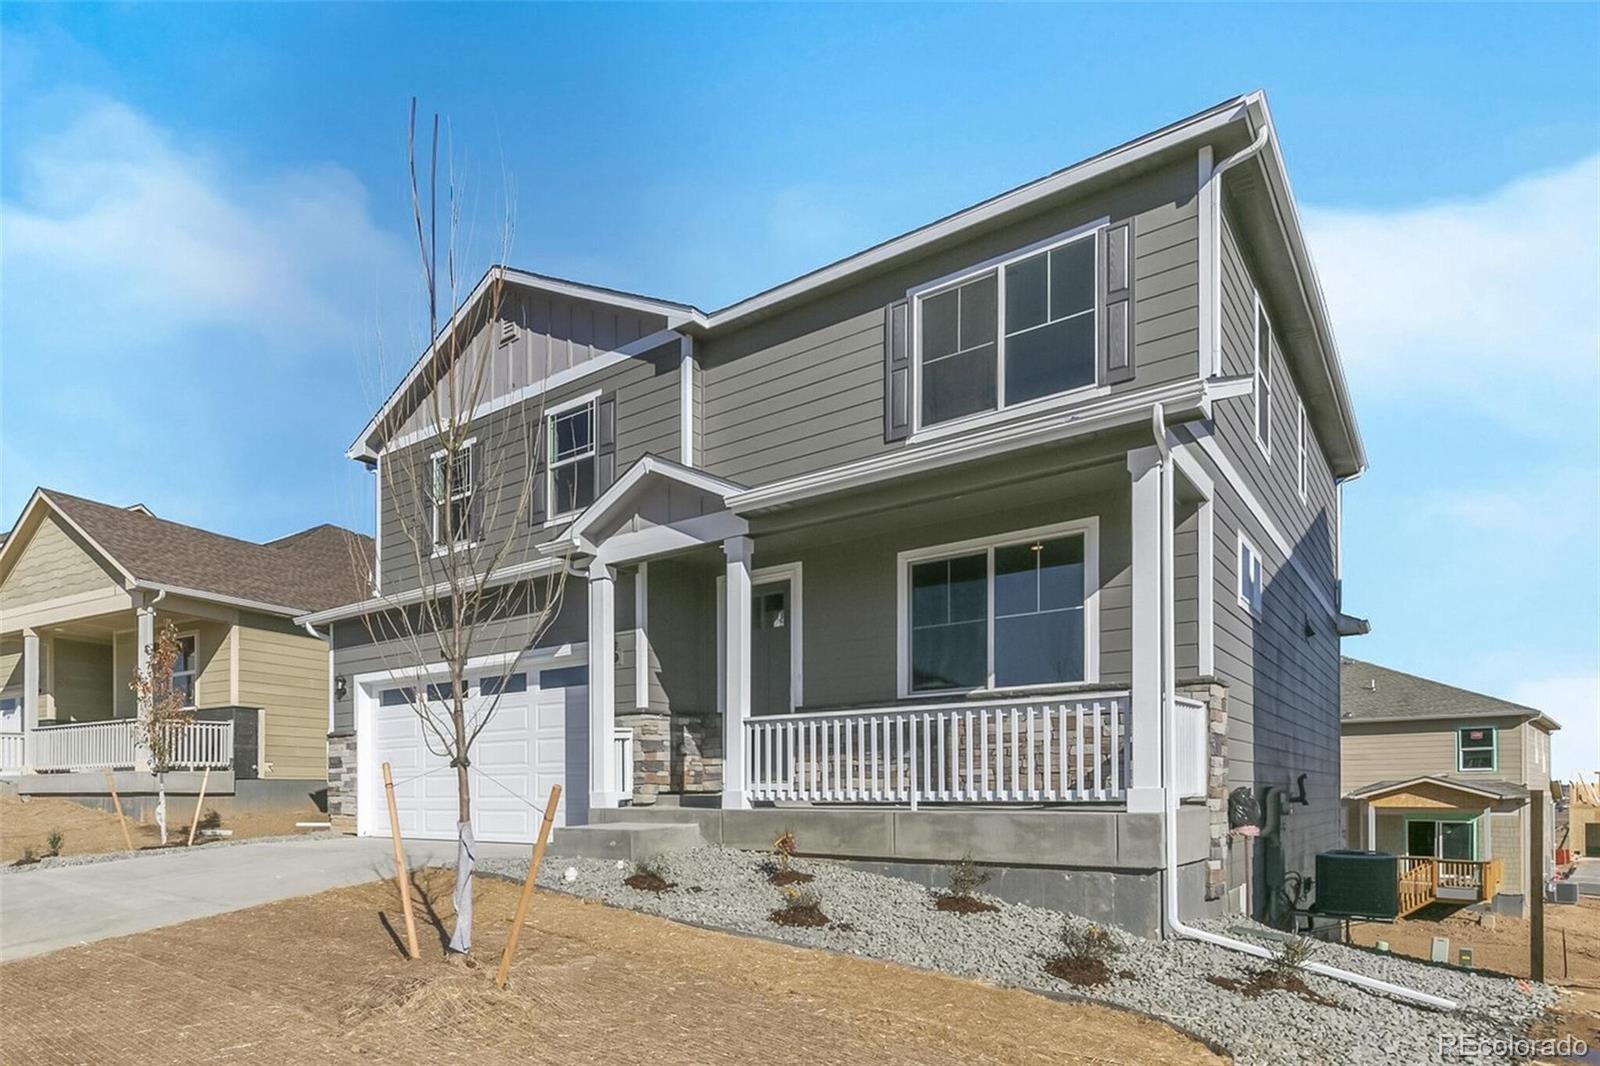 Report Image for 18203  Prince Hill Circle,Parker, Colorado